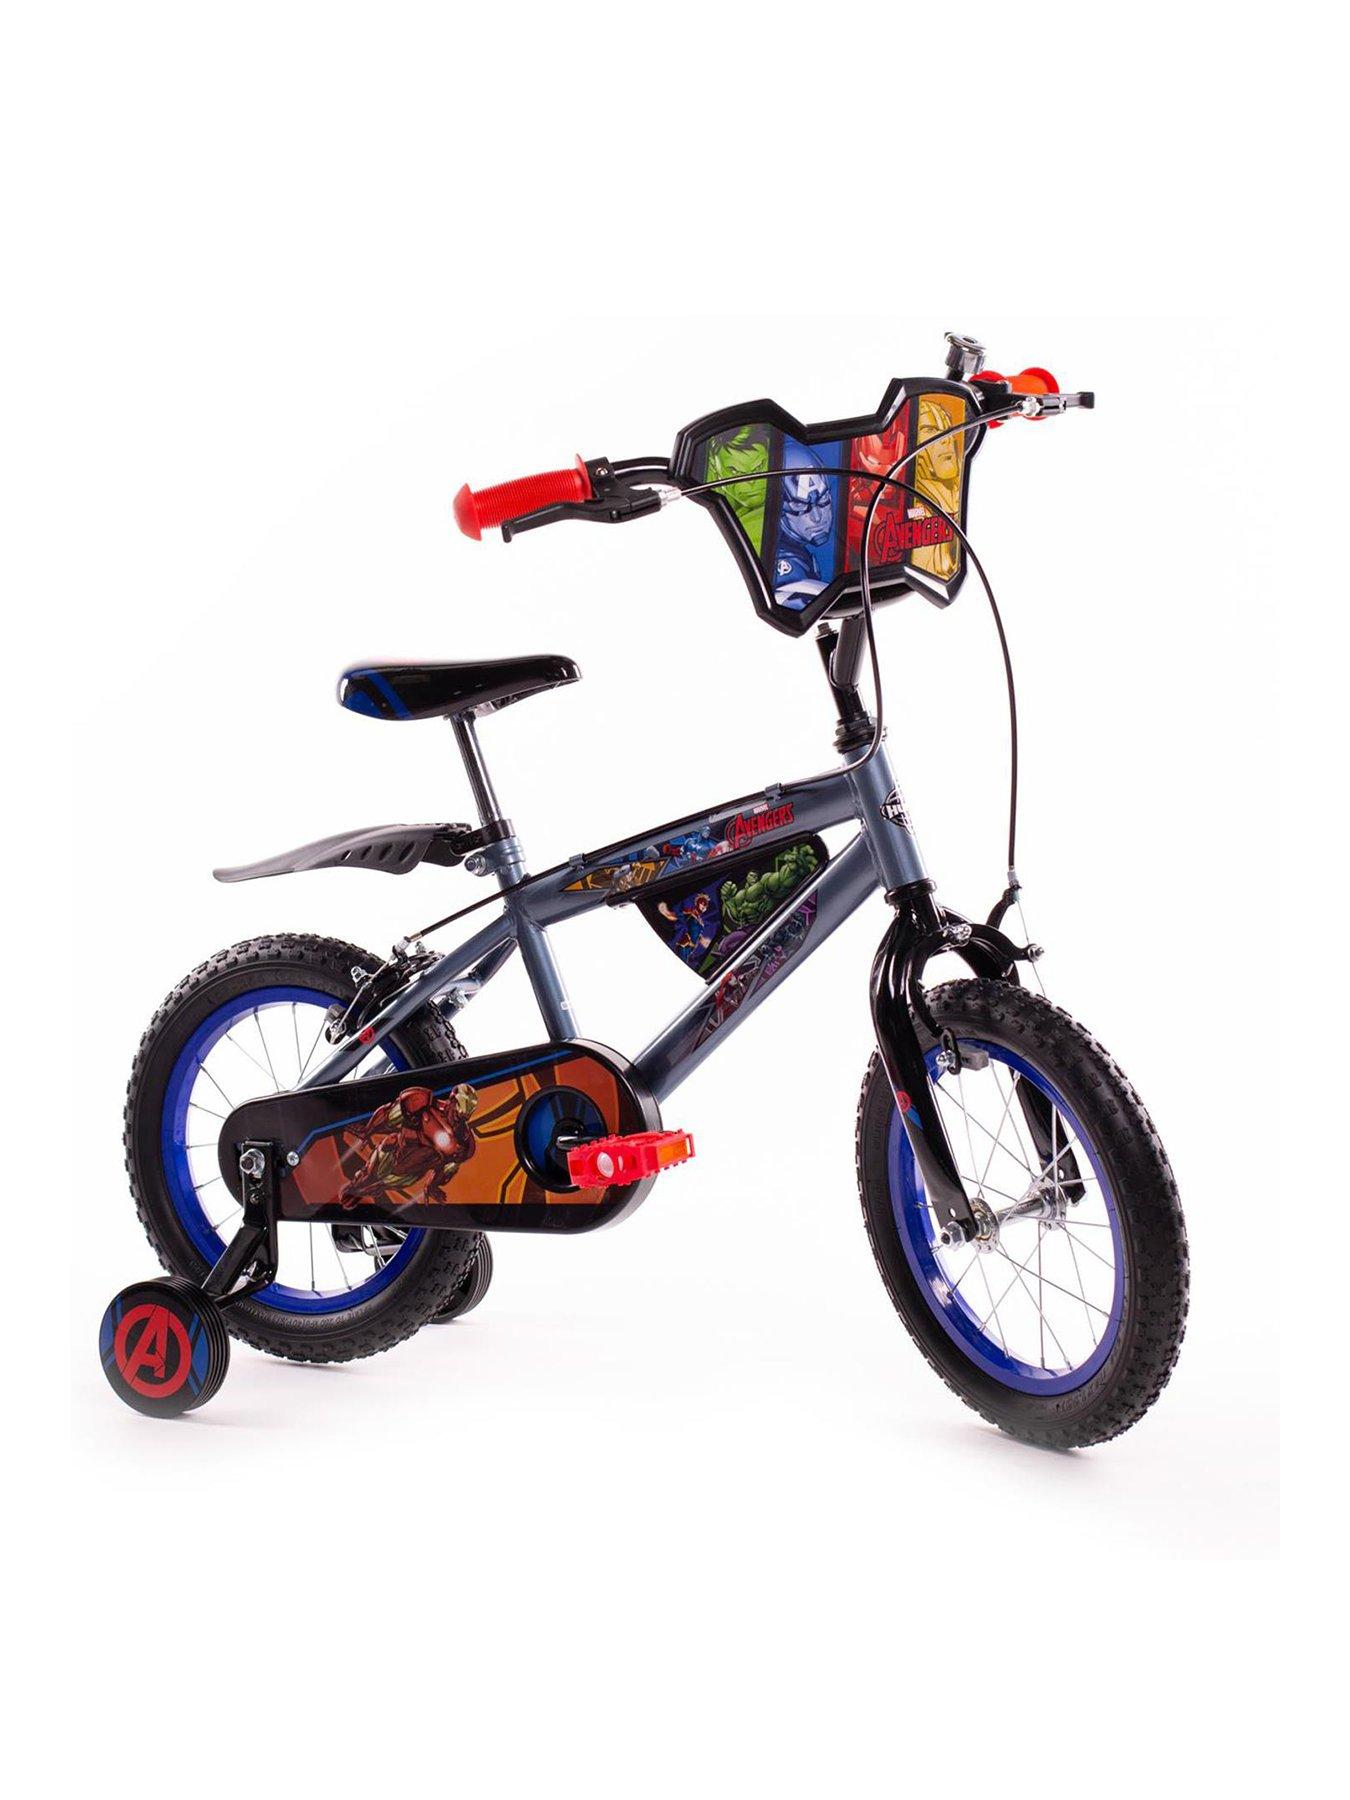 HADST Kids Bike 12 with Training Wheels Toddlers Street/Dirt Bikes No Battery Childrens Freestyle Bicycles for 2 3 4 Year Old Boys Girls Motorcycle Style with Kettle 